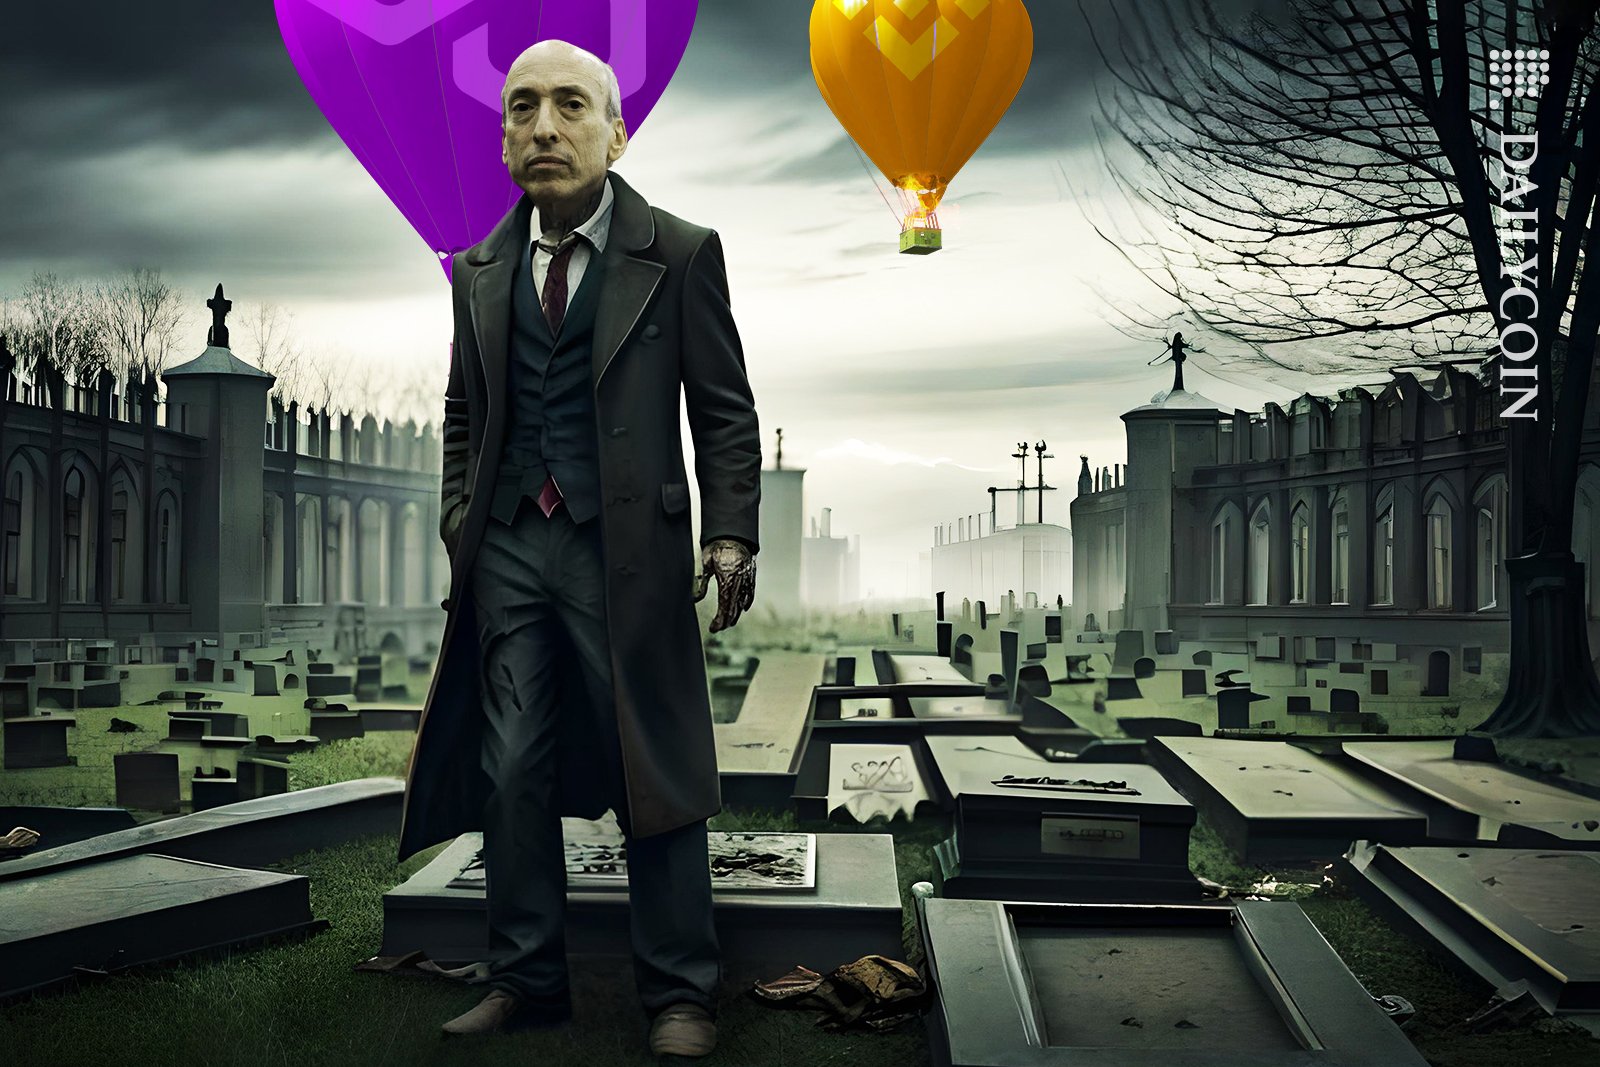 Gary Gensler managing the crypto graveyard whilst BNB and Polygon (matic) are up in the air balloon.